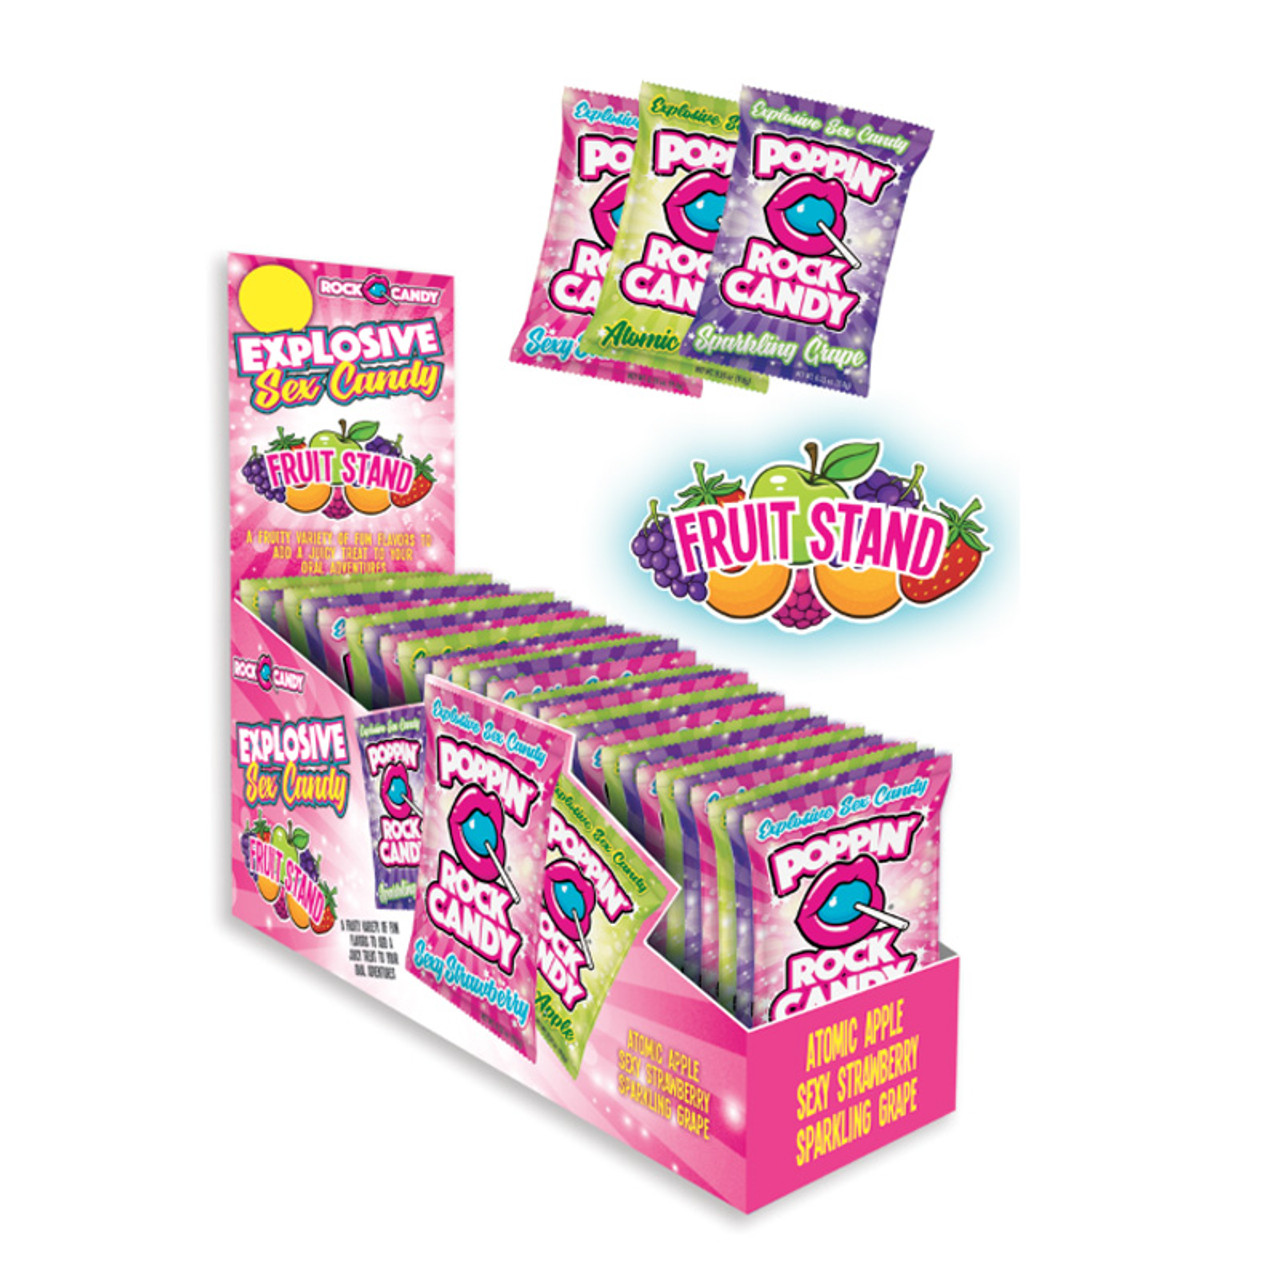 Popping Rock Candy - Fruit Stand Oral Sex Candy